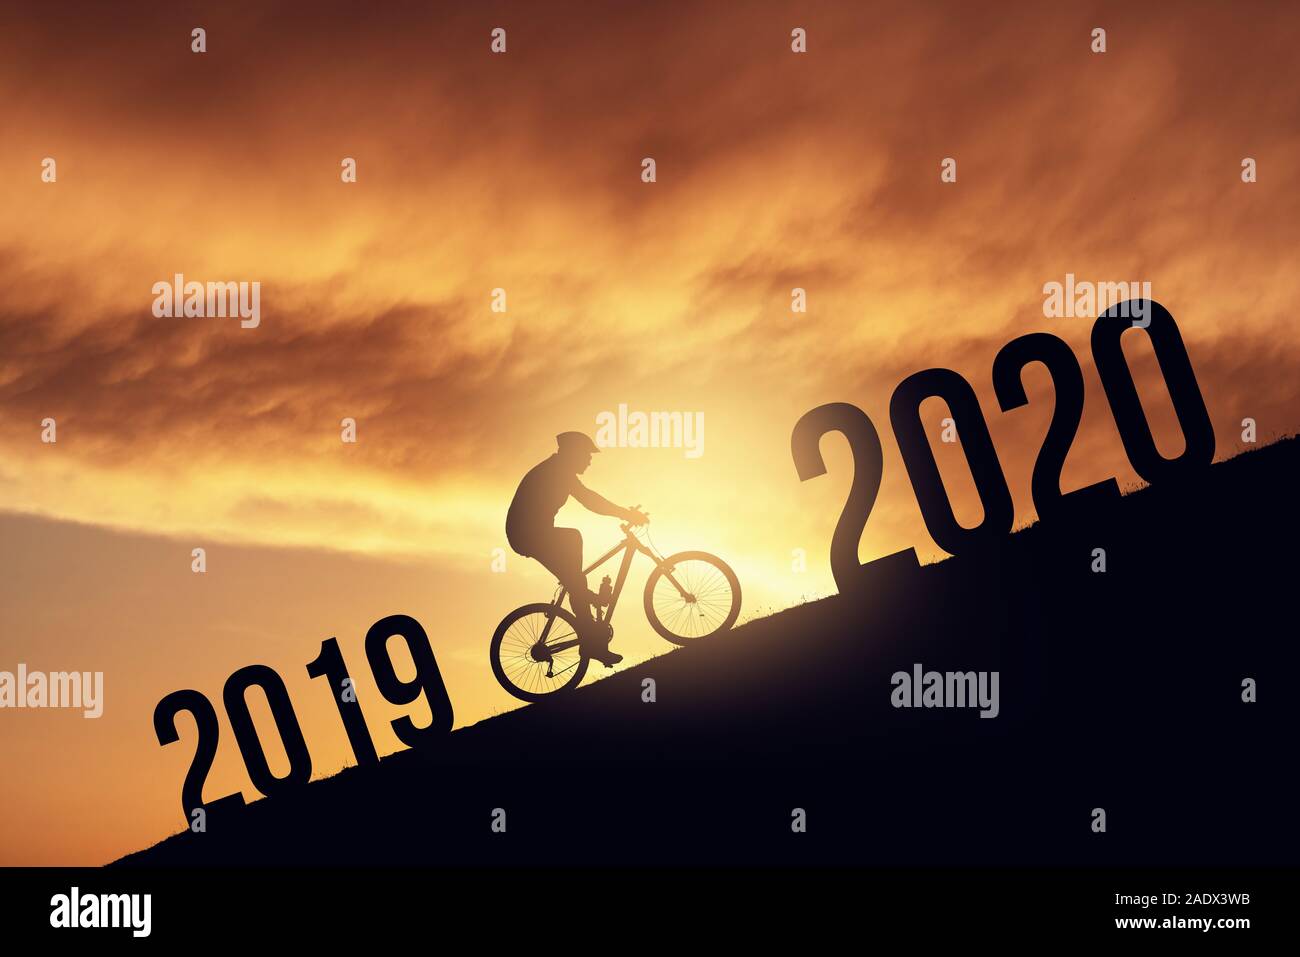 2020 new year concept with the silhoutte of a bicycle rider, metmorphing the changes of years. Stock Photo